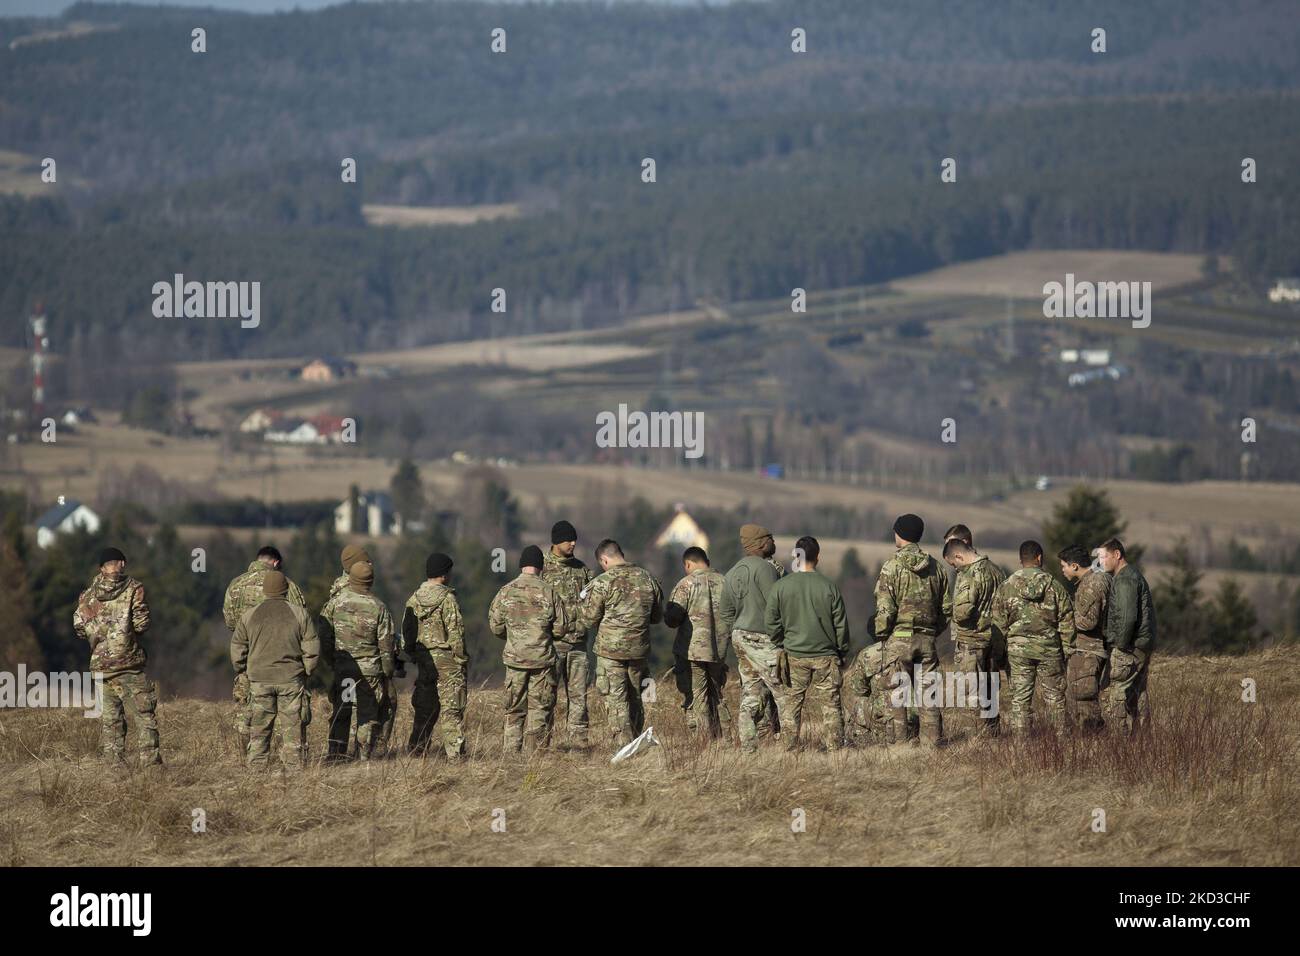 American soldiers sent to the Polish-Ukrainian border in connection with the crisis in Ukraine seen near arlamow on February 24, 2022. (Photo by Maciej Luczniewski/NurPhoto) Stock Photo